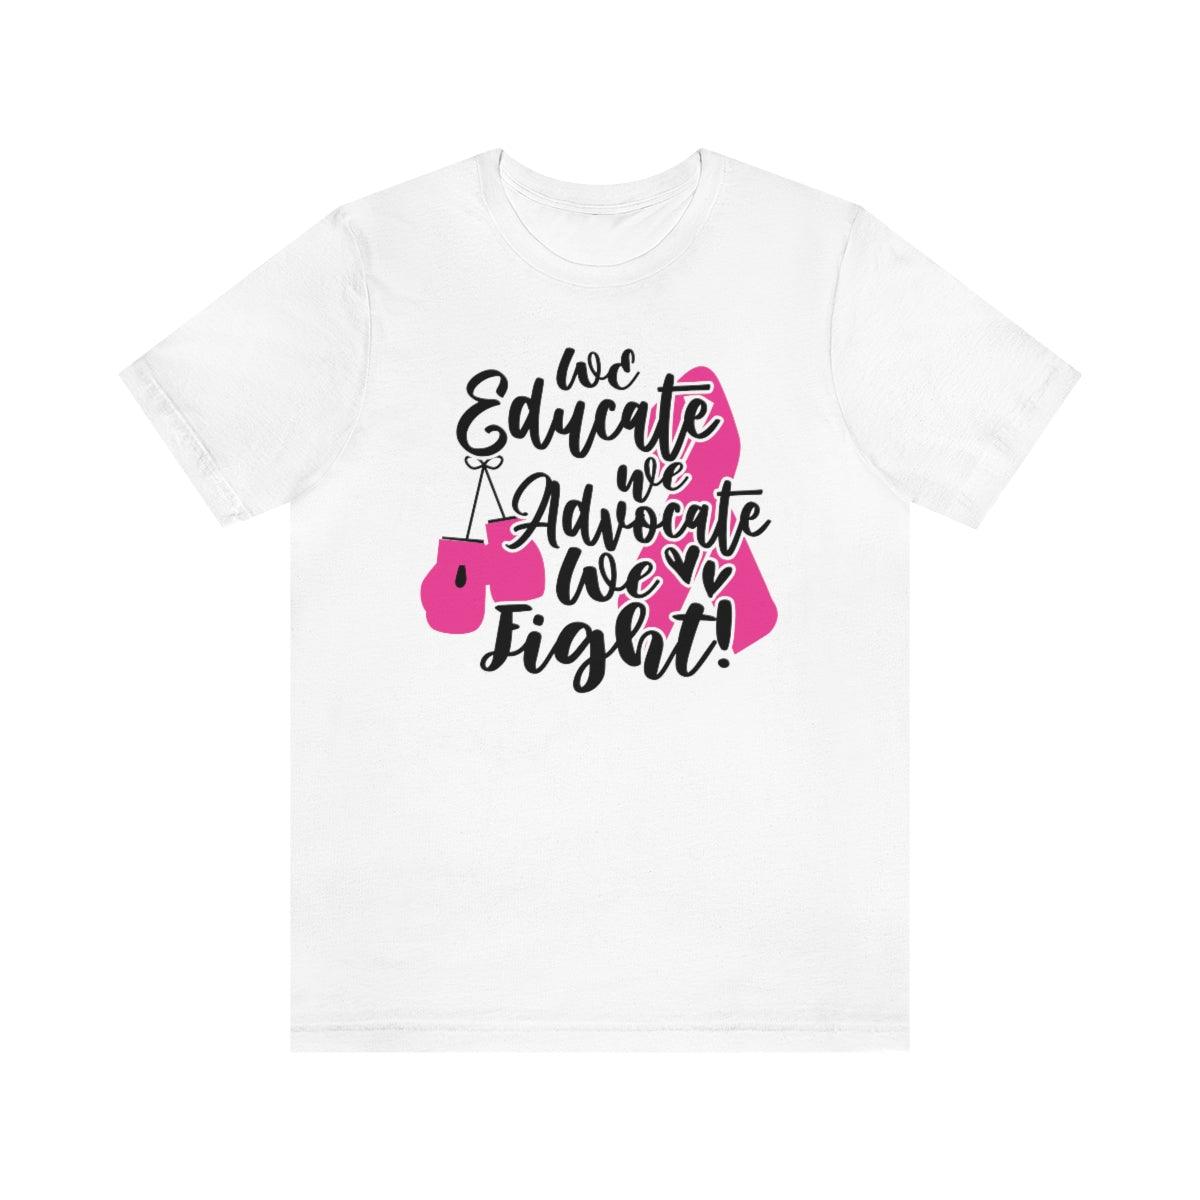 We educate. We advocate. We fight! Tee (Gloves) - Sharp Tact Kreativ | Tees & Gifts with Encouraging Messages to Brighten Your Day with a Bit of Wit